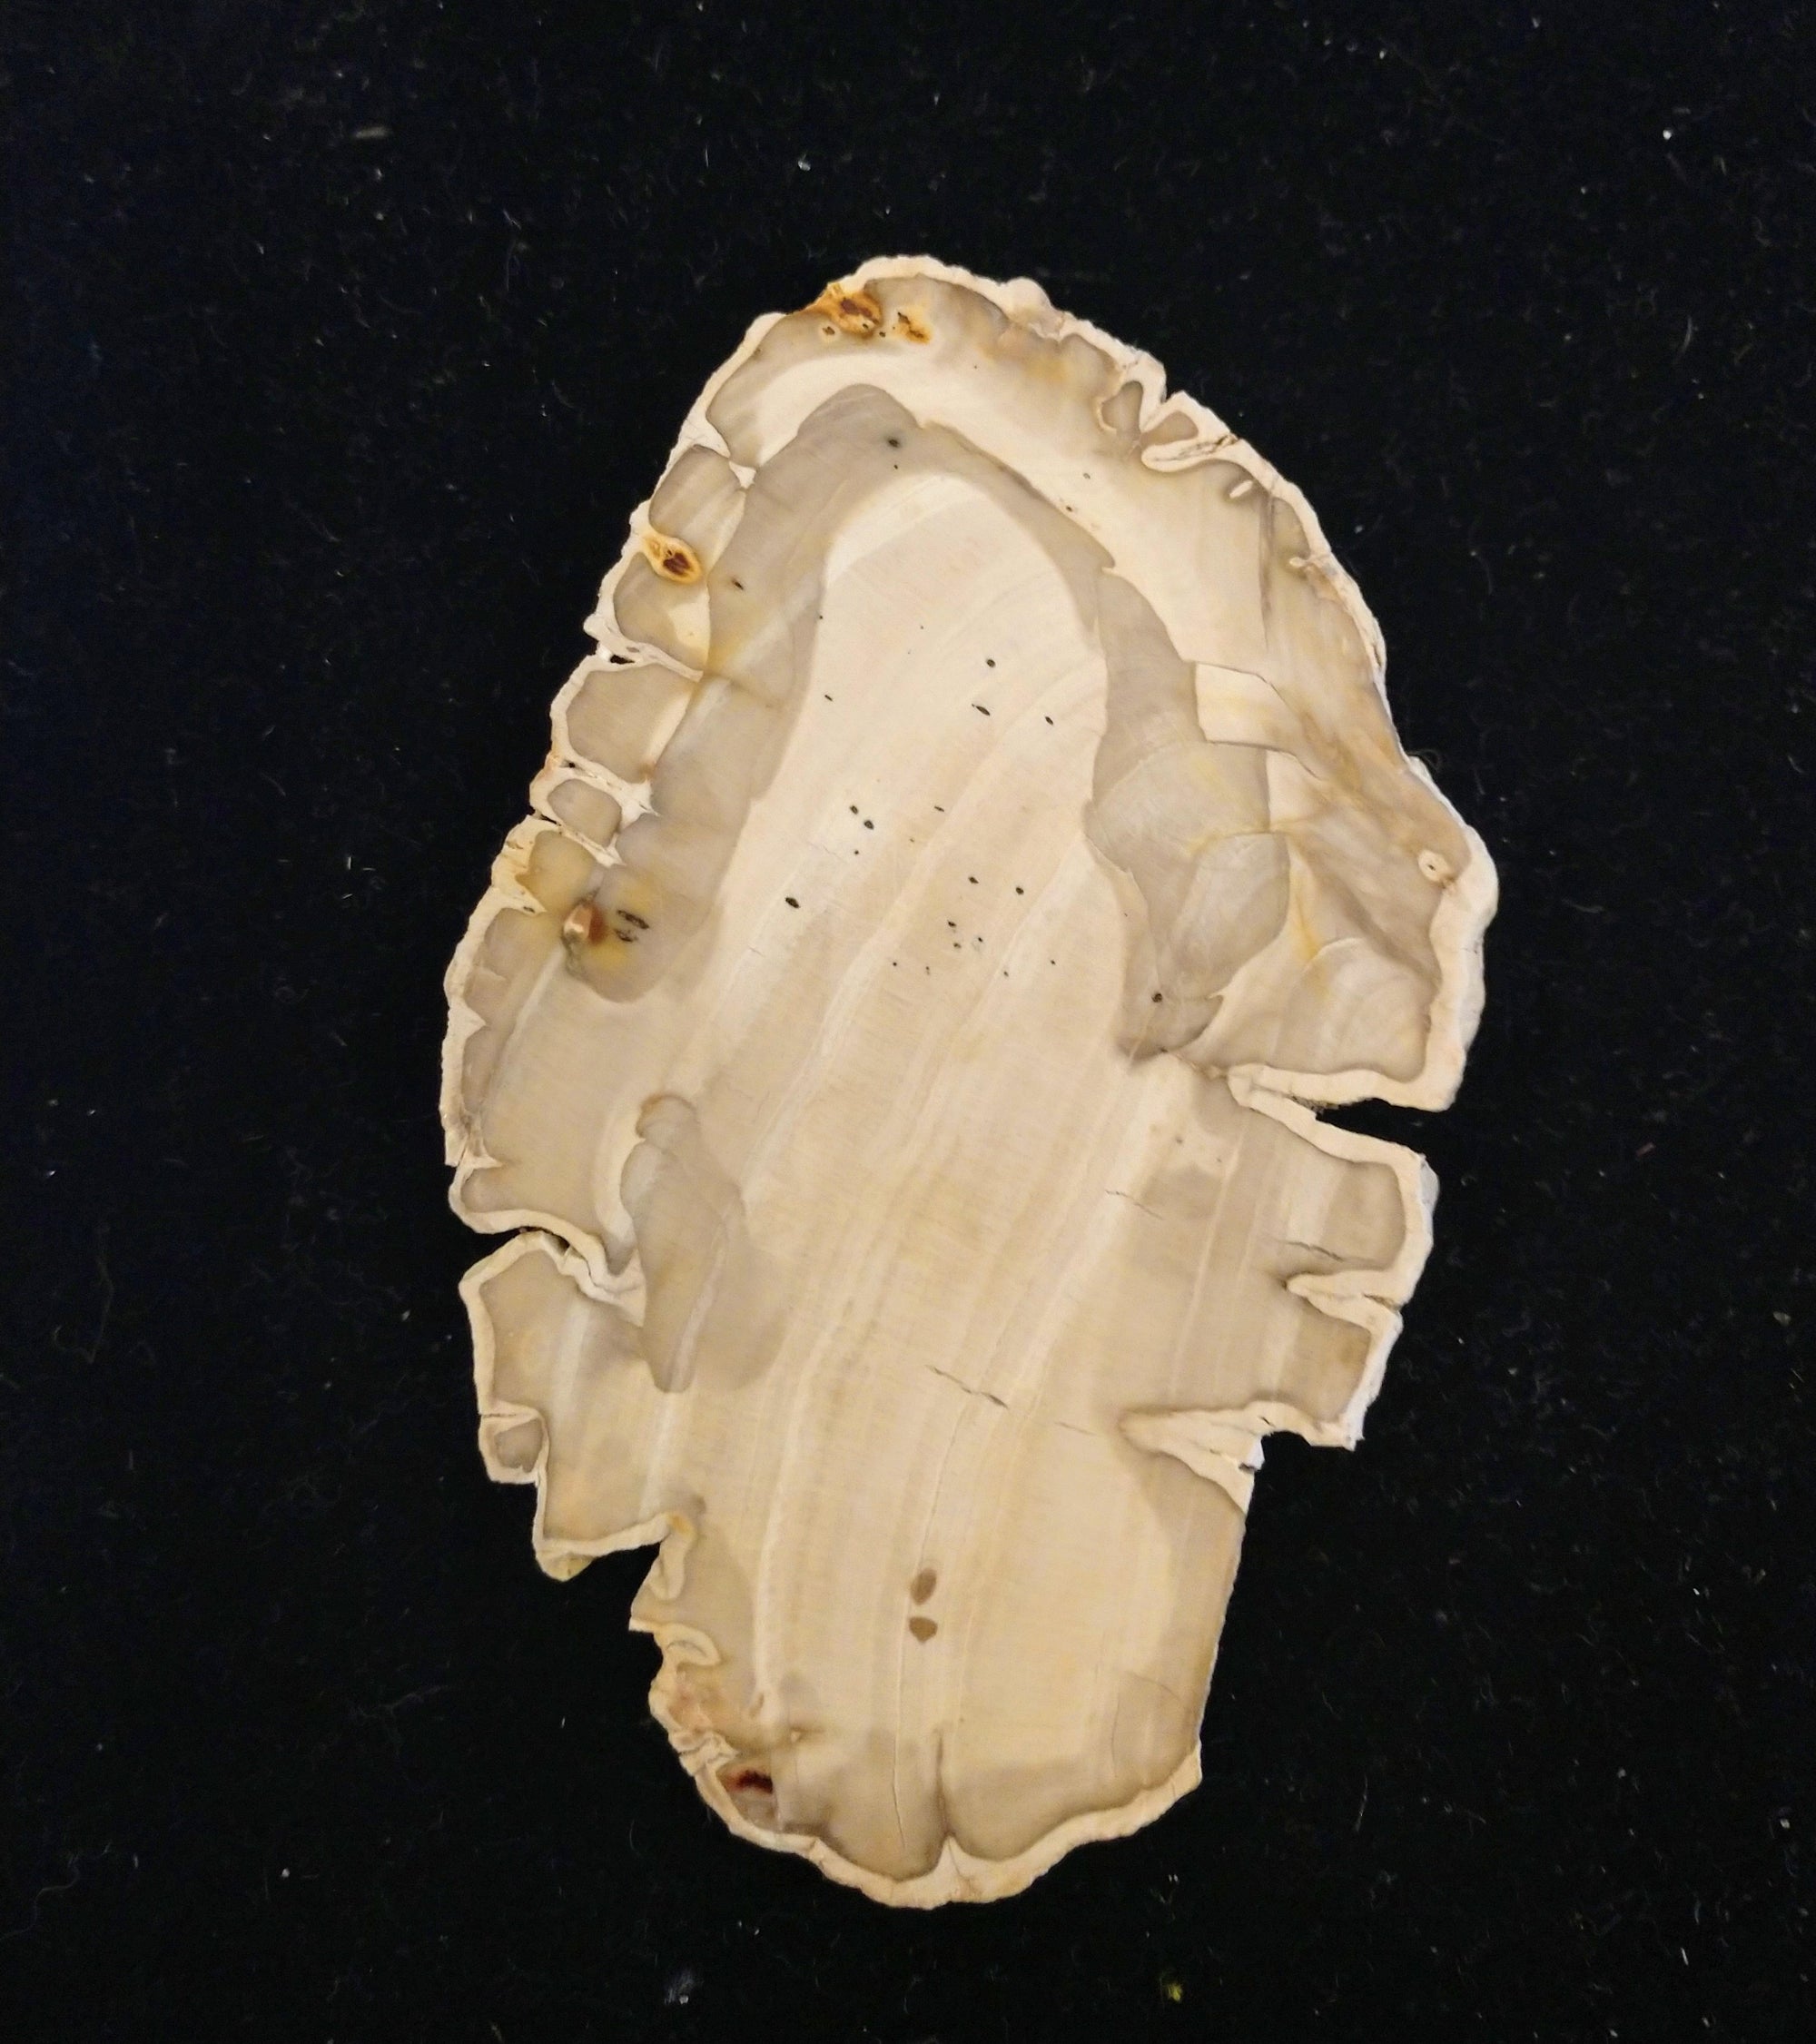 Petrified Wood Slices from Madagascar